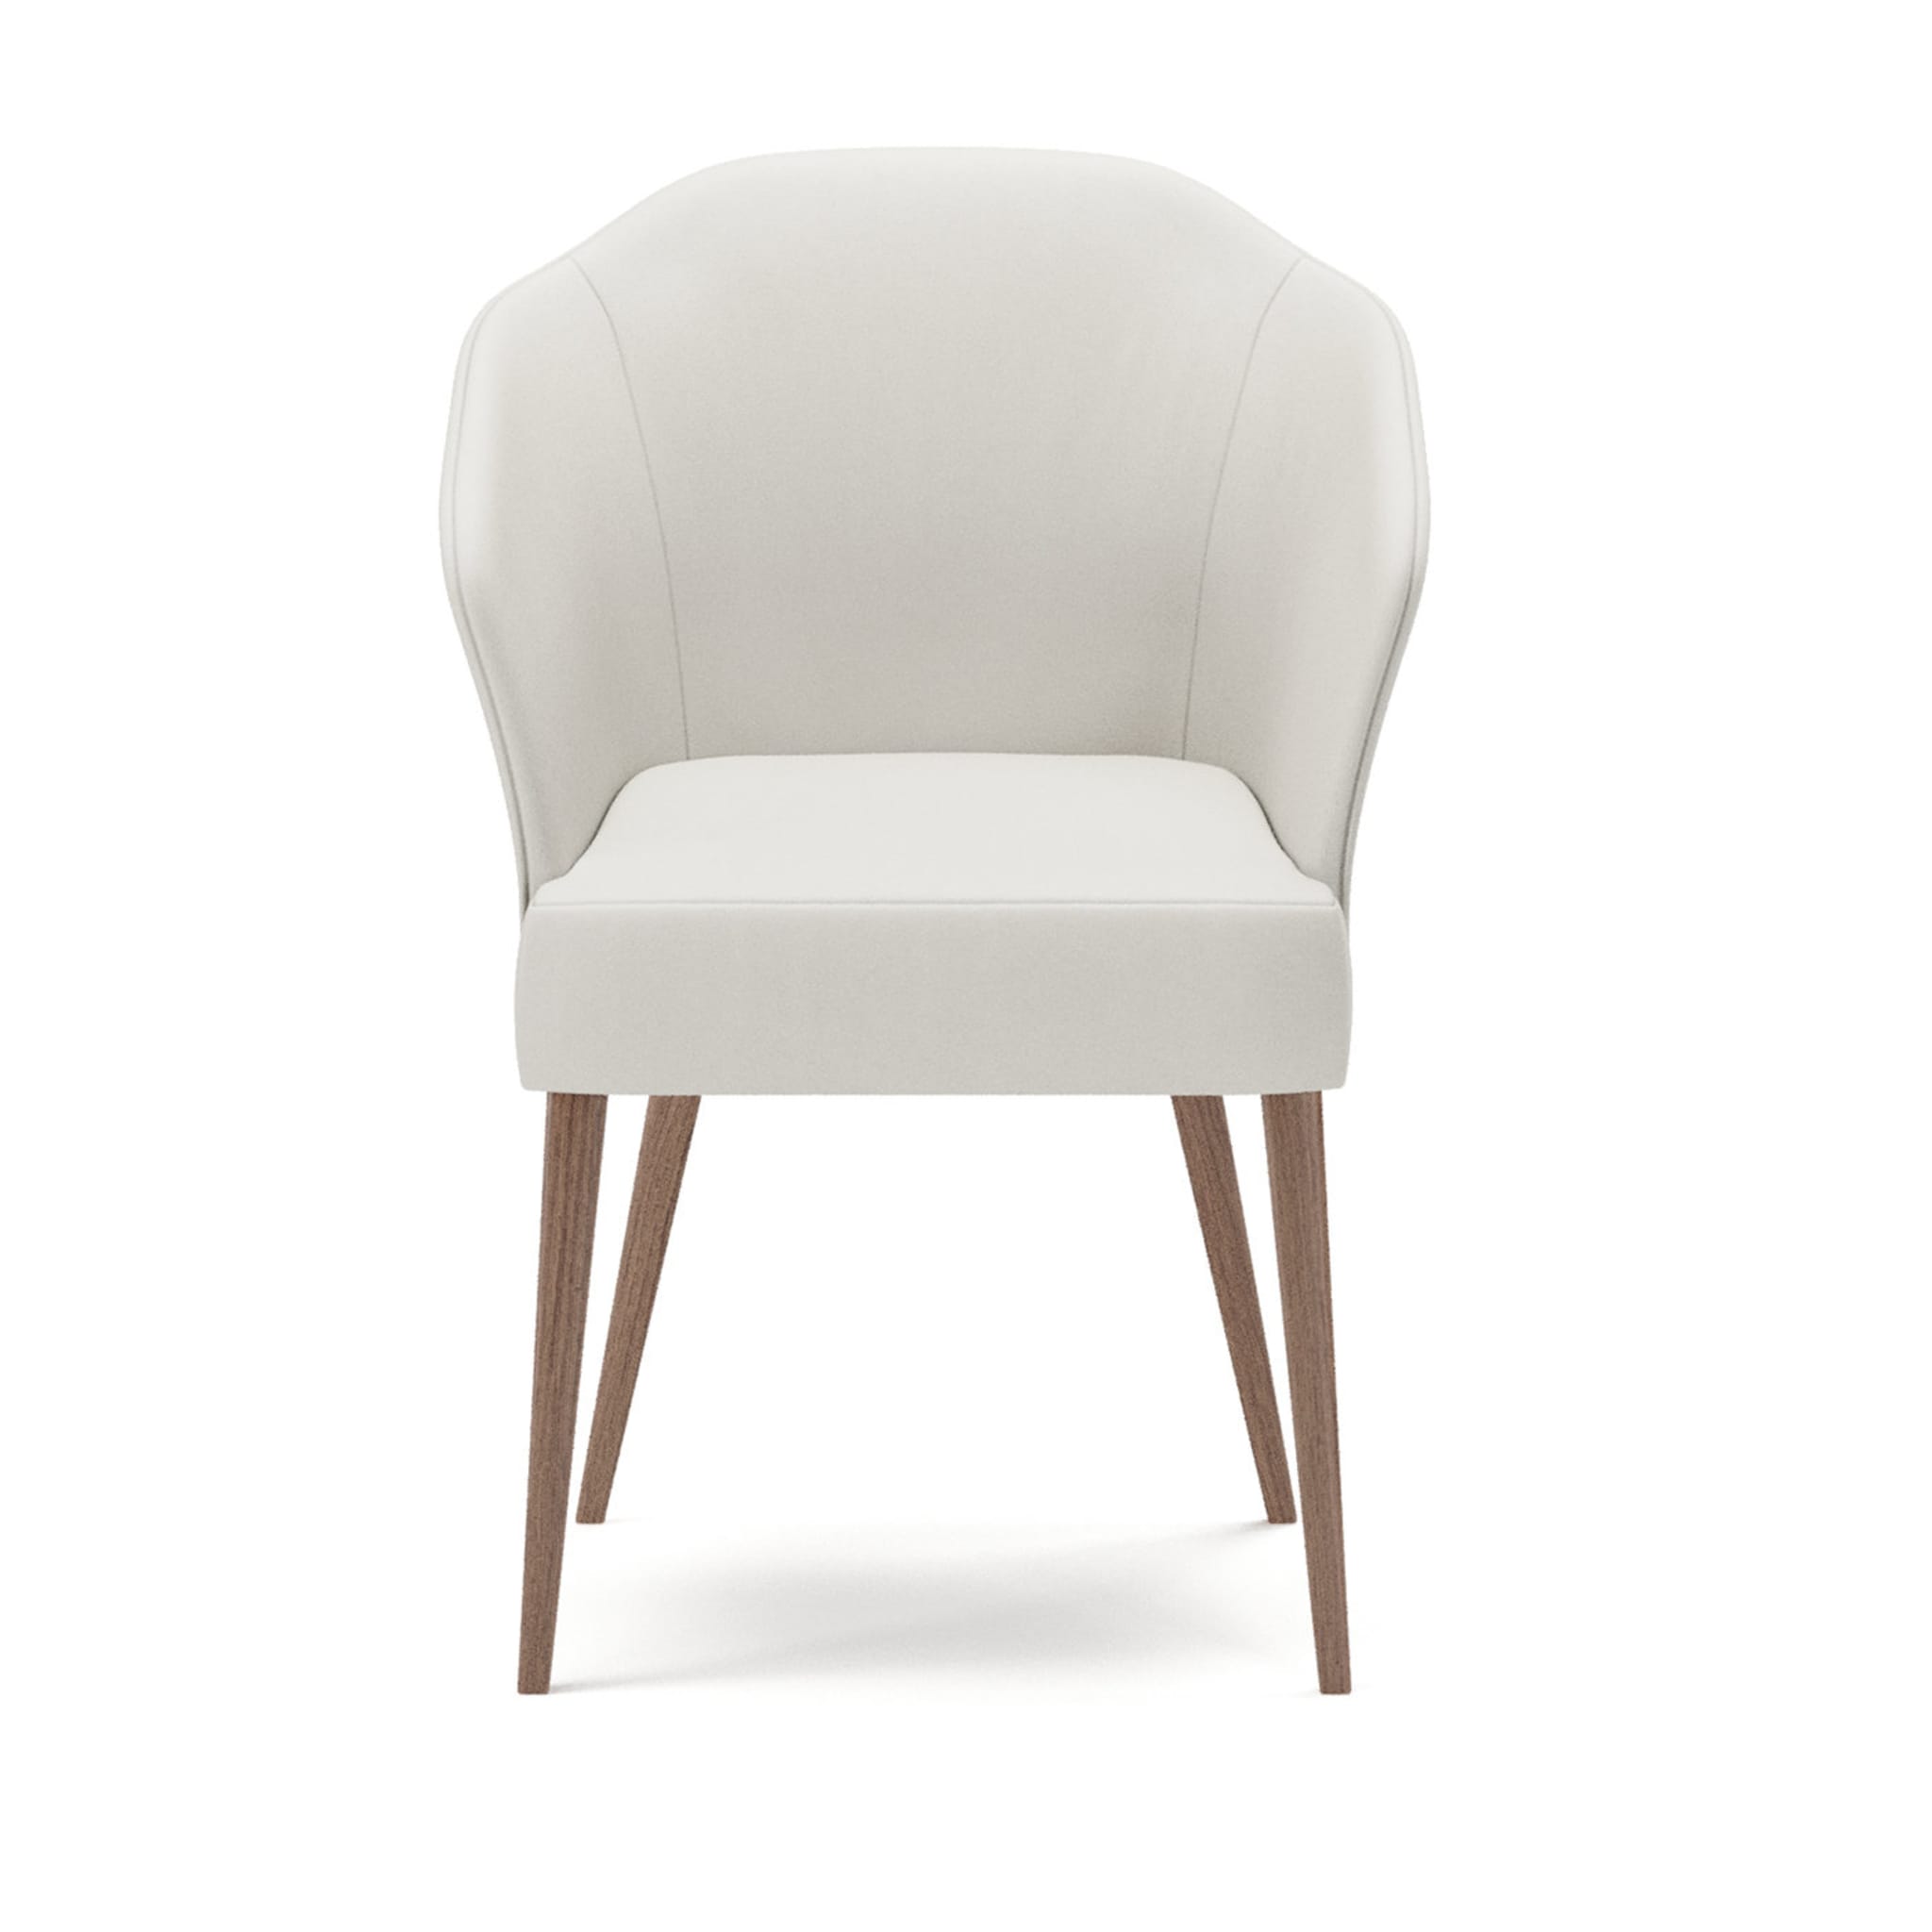 Harvey Chair with Armrests - Alternative view 1